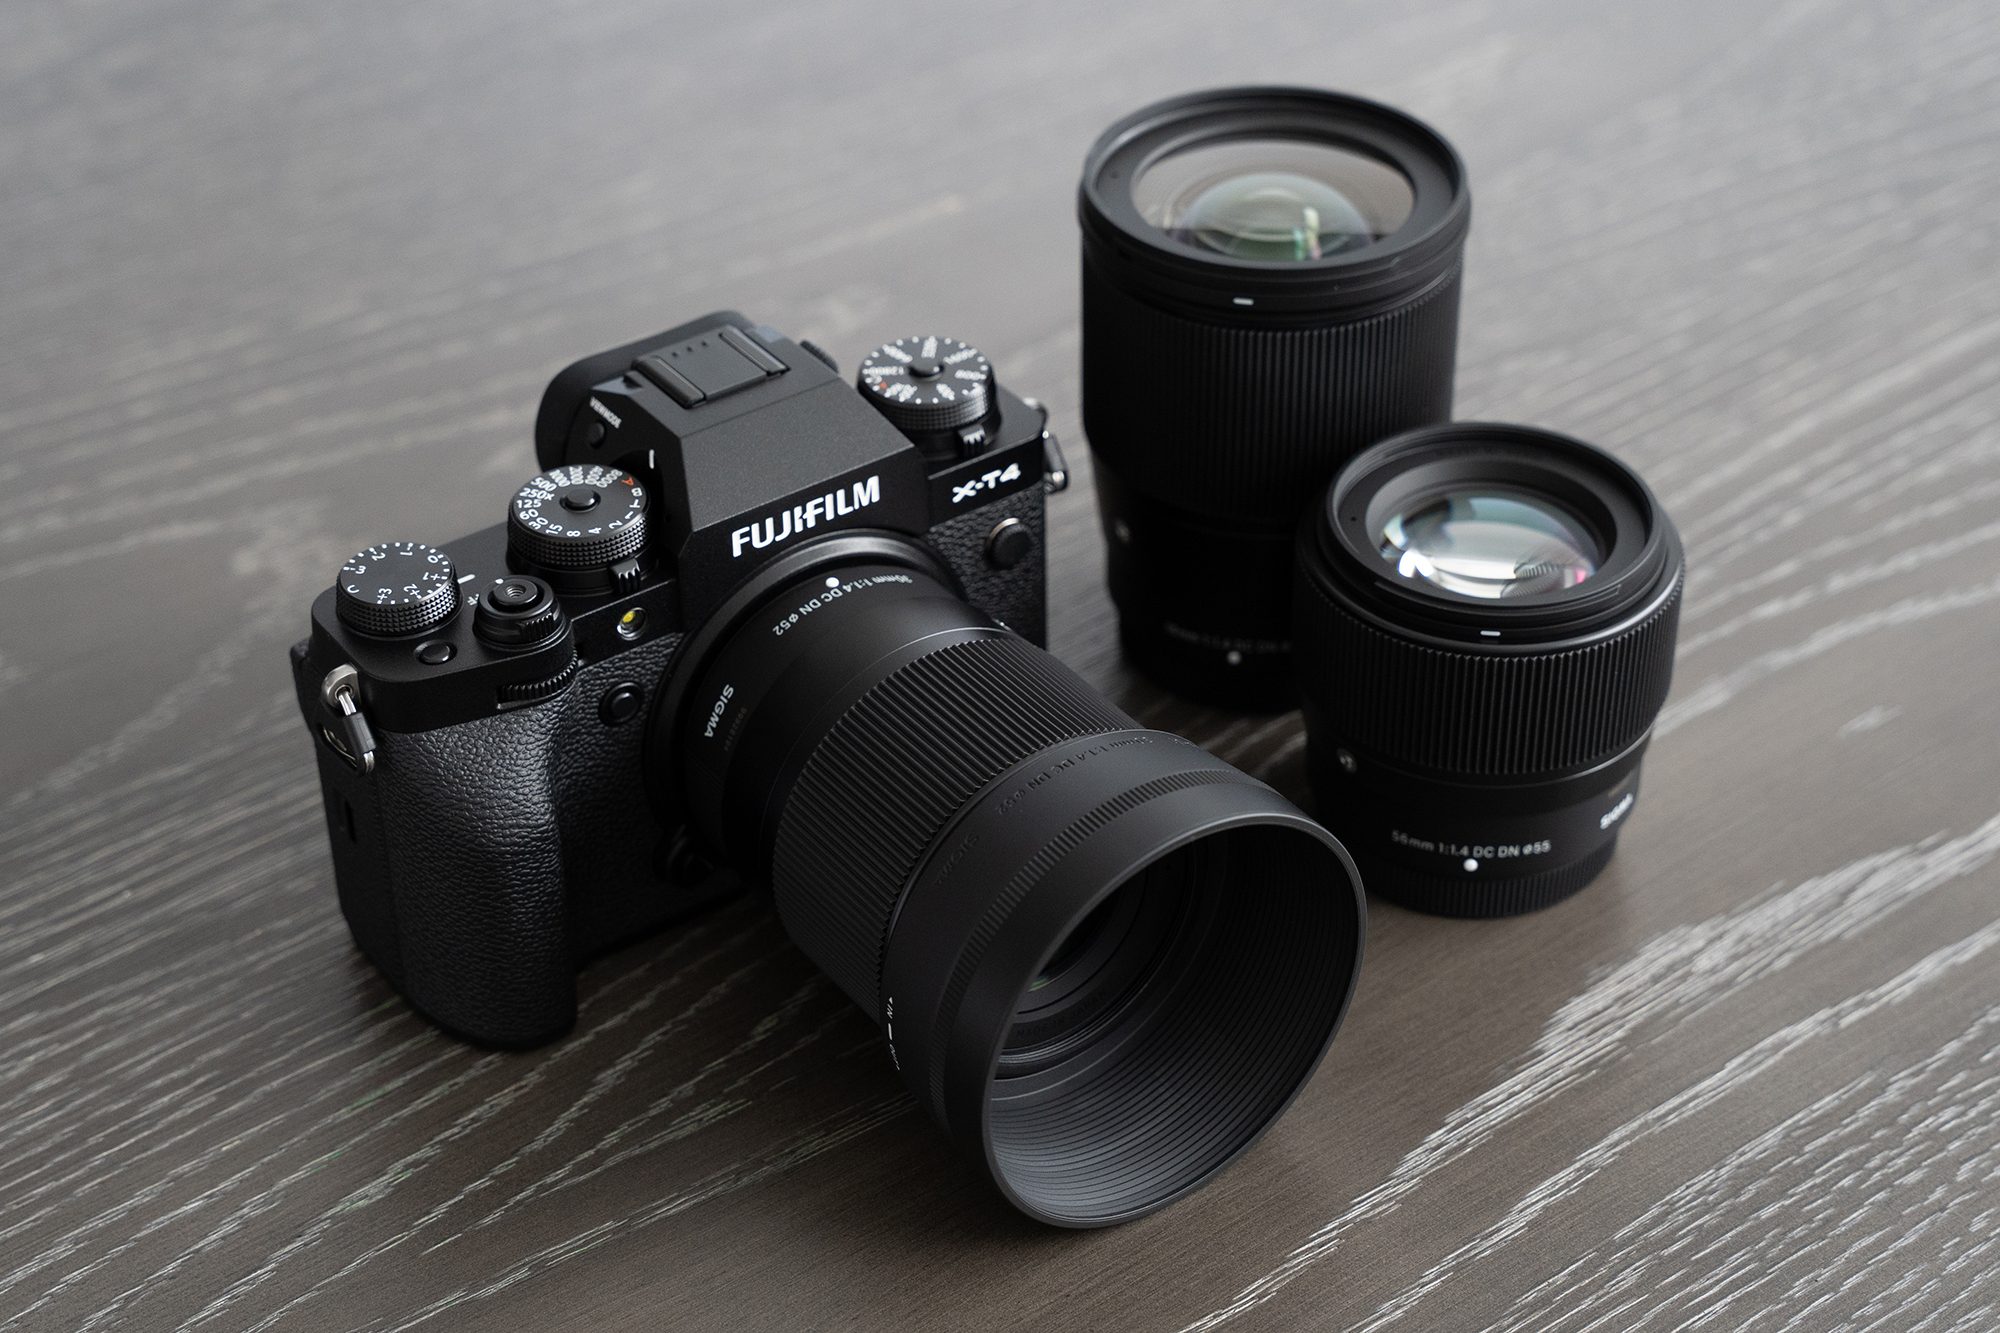 A Long-Awaited Day Out with SIGMA Prime Lenses for Fujifilm X Mount